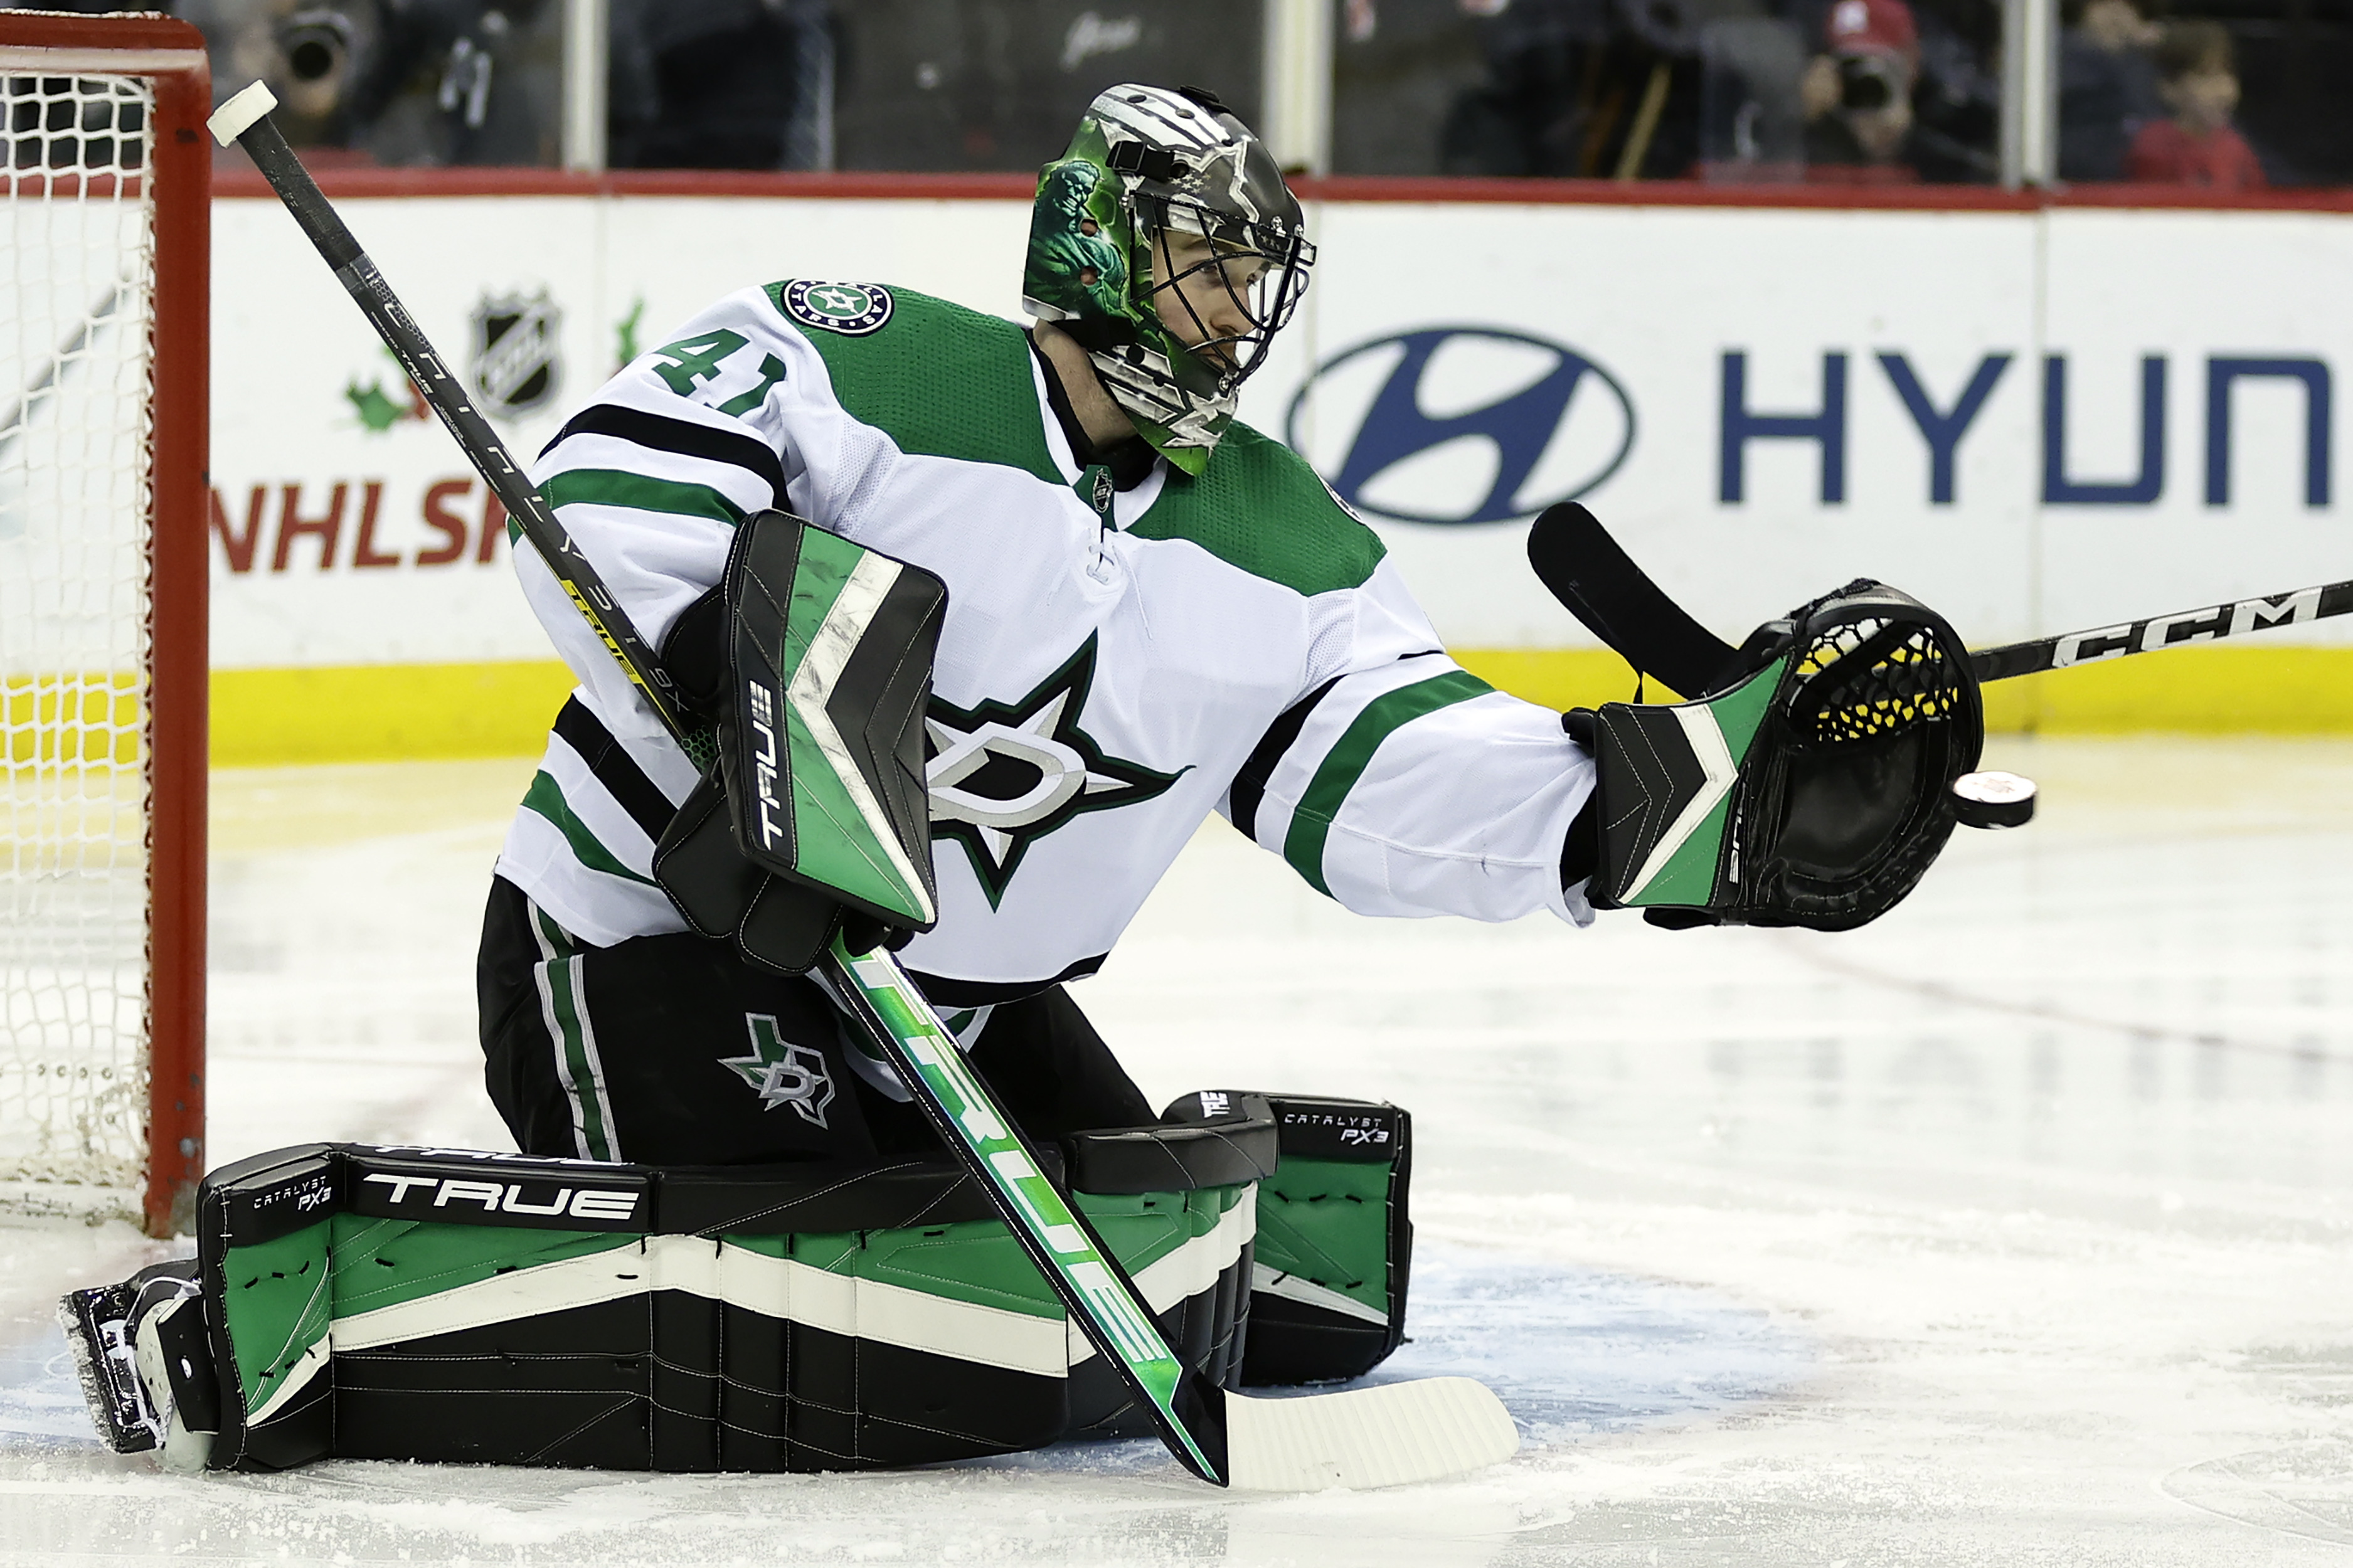 Goalie Wedgewood re-signs with New Jersey Devils; Comets add 3 to roster